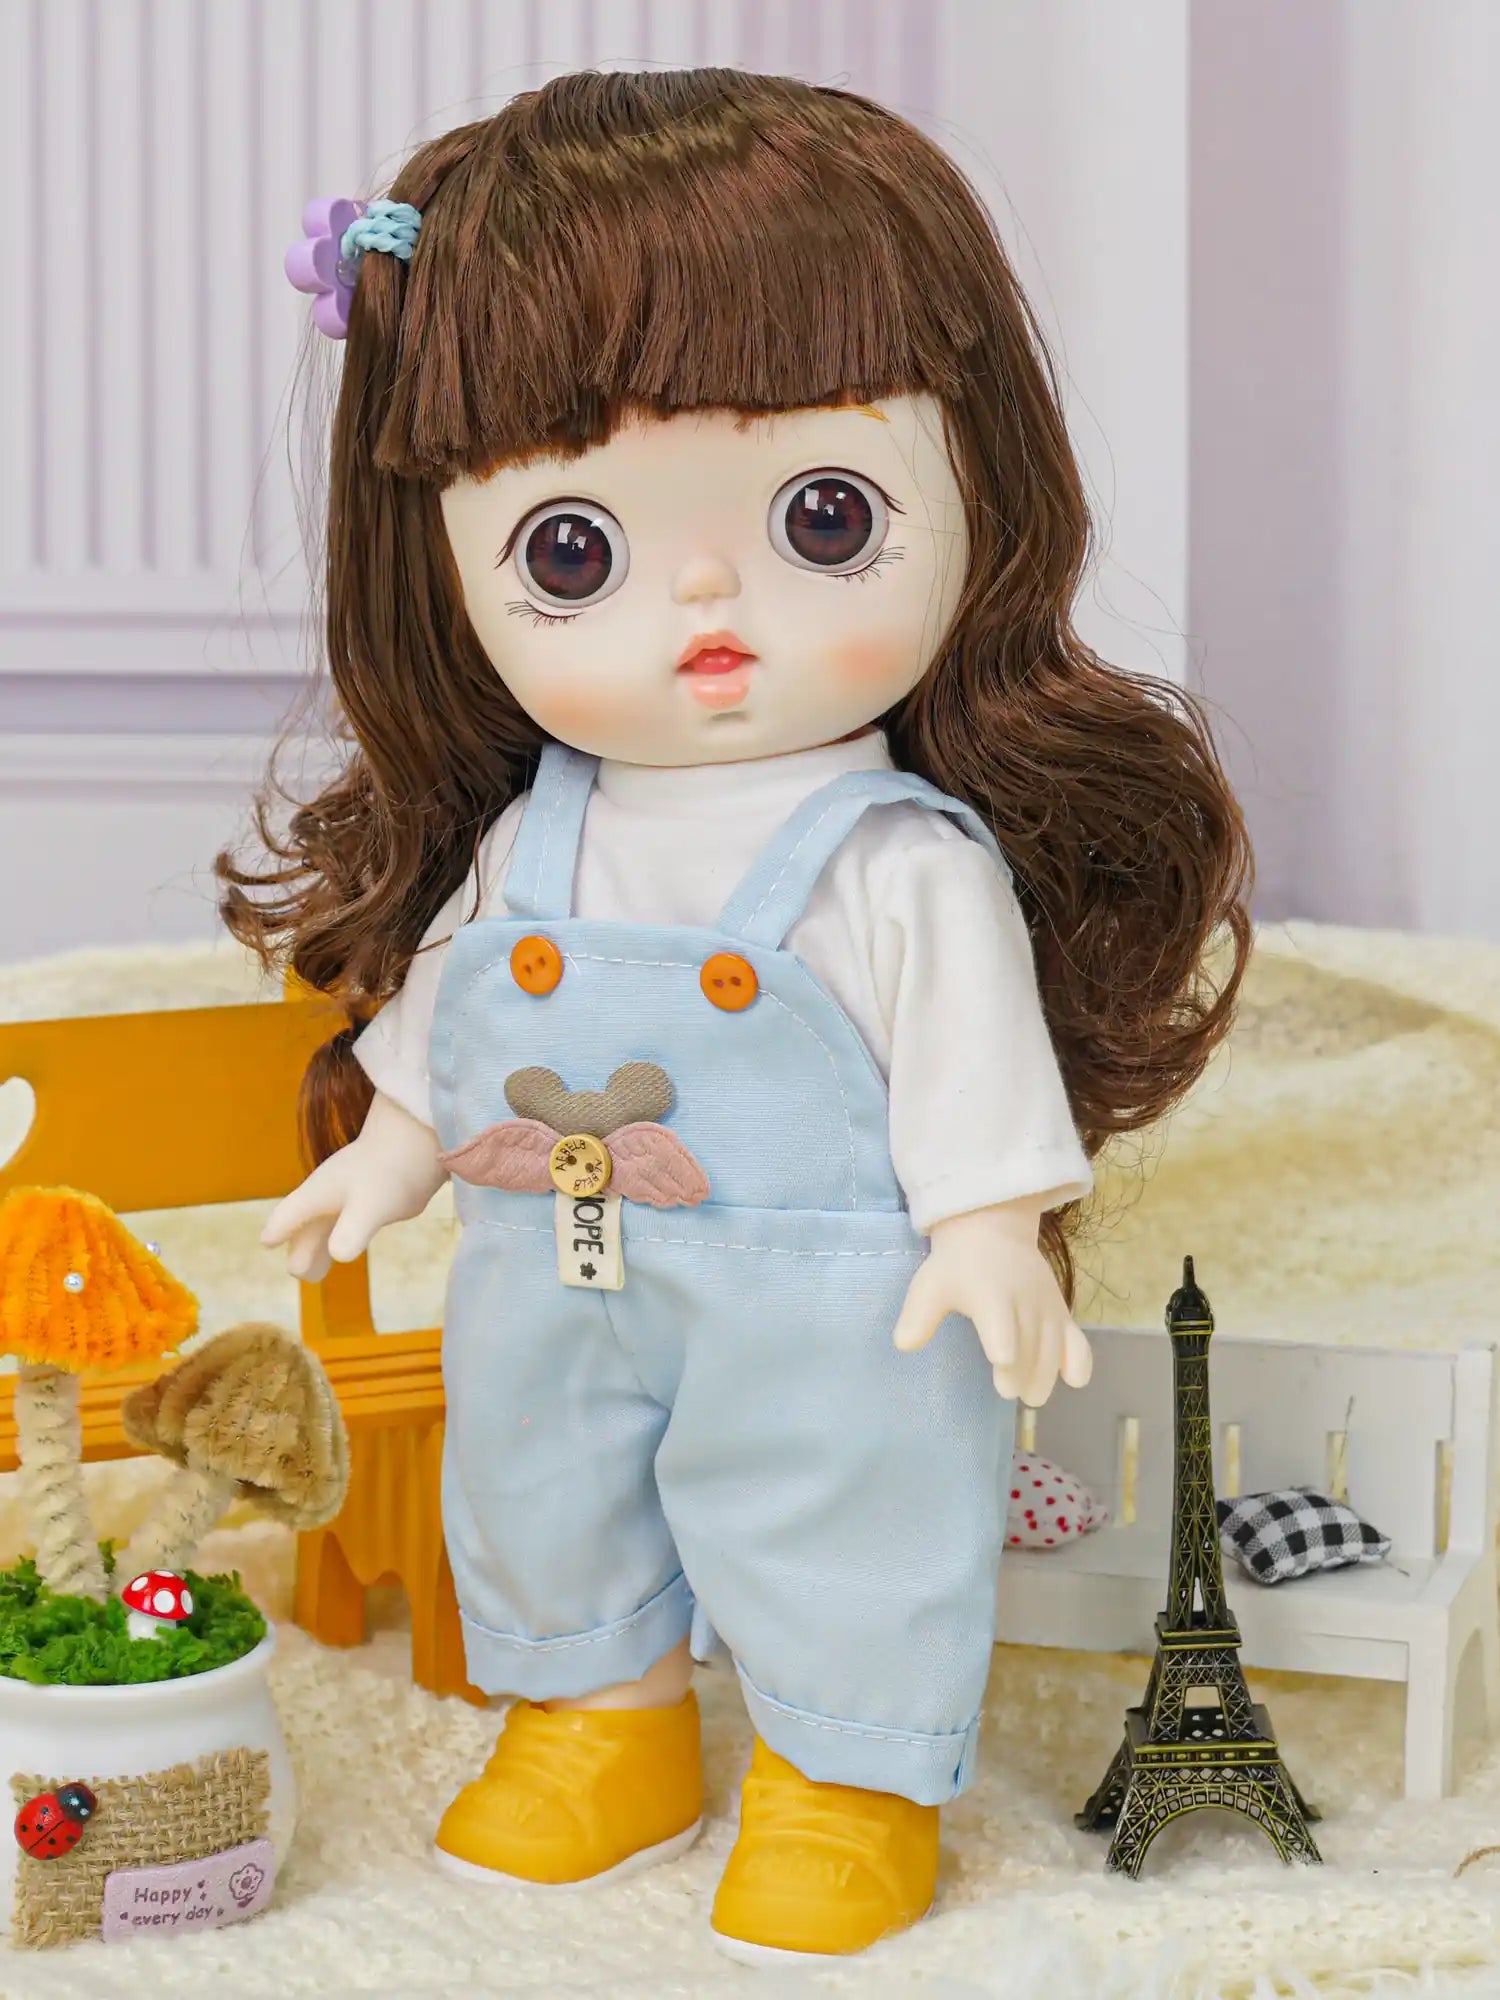 A brunette doll with lifelike eyes, dressed in cute overalls, in a setup with playful mushroom decor and a Parisian touch.